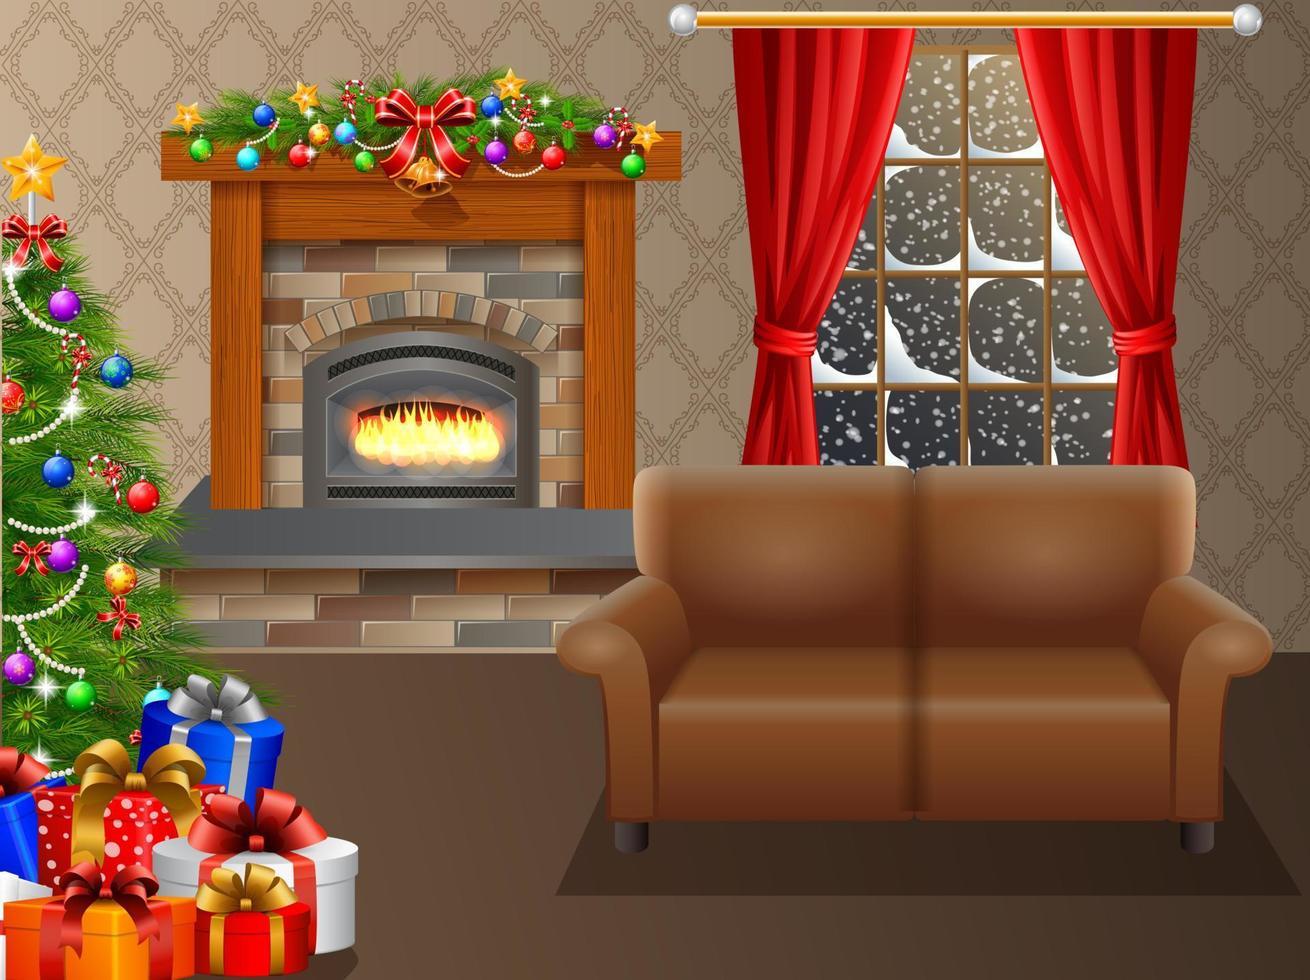 Fireplace and Christmas tree with presents in living room vector